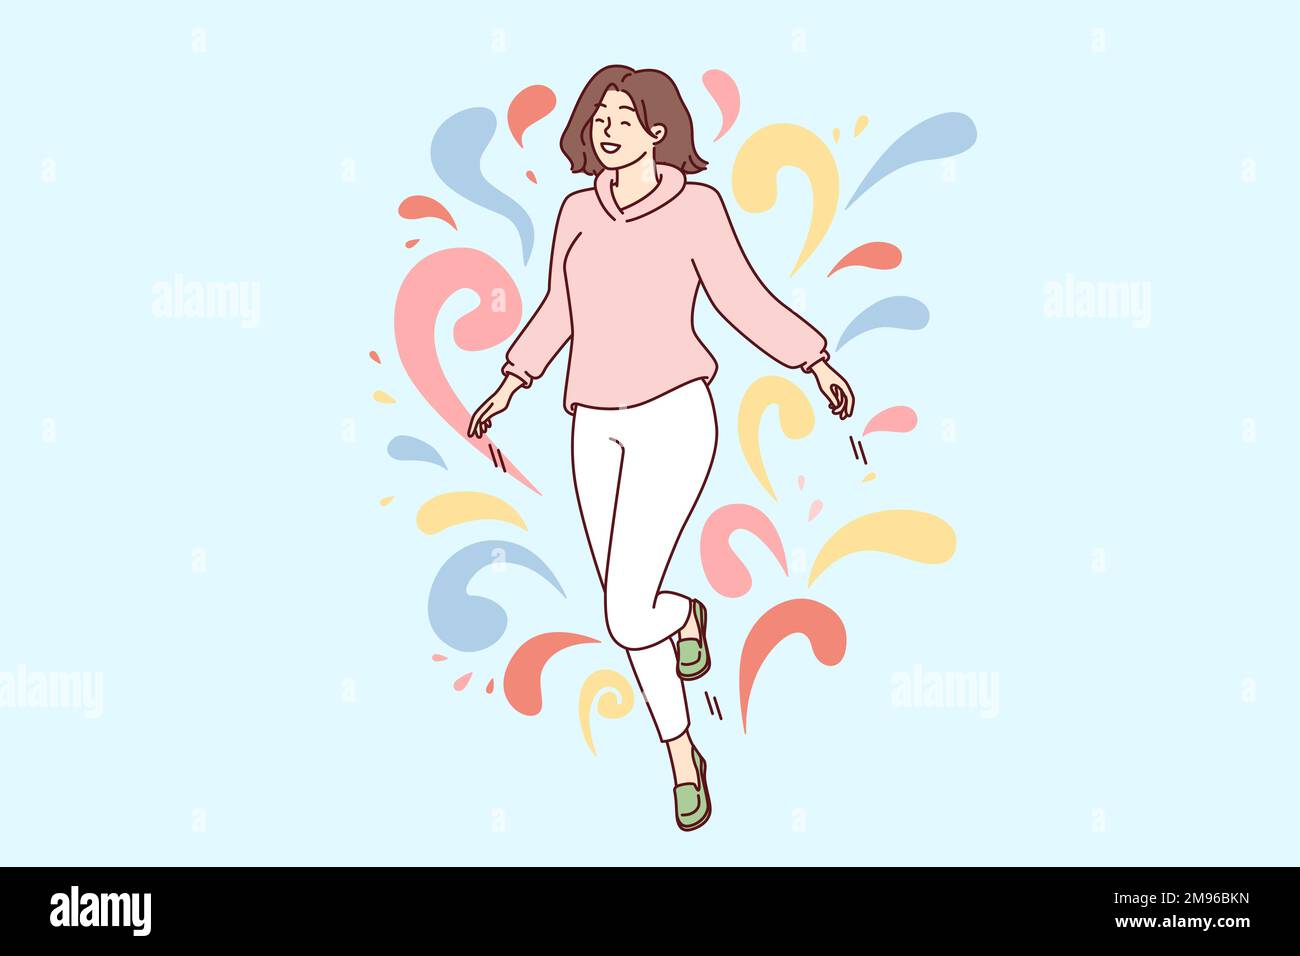 Woman walks in weightlessness and waves arms located among multi-colored drops flying in different directions. Carefree girl feels happy after dating or taking antidepressants. Flat vector design  Stock Vector